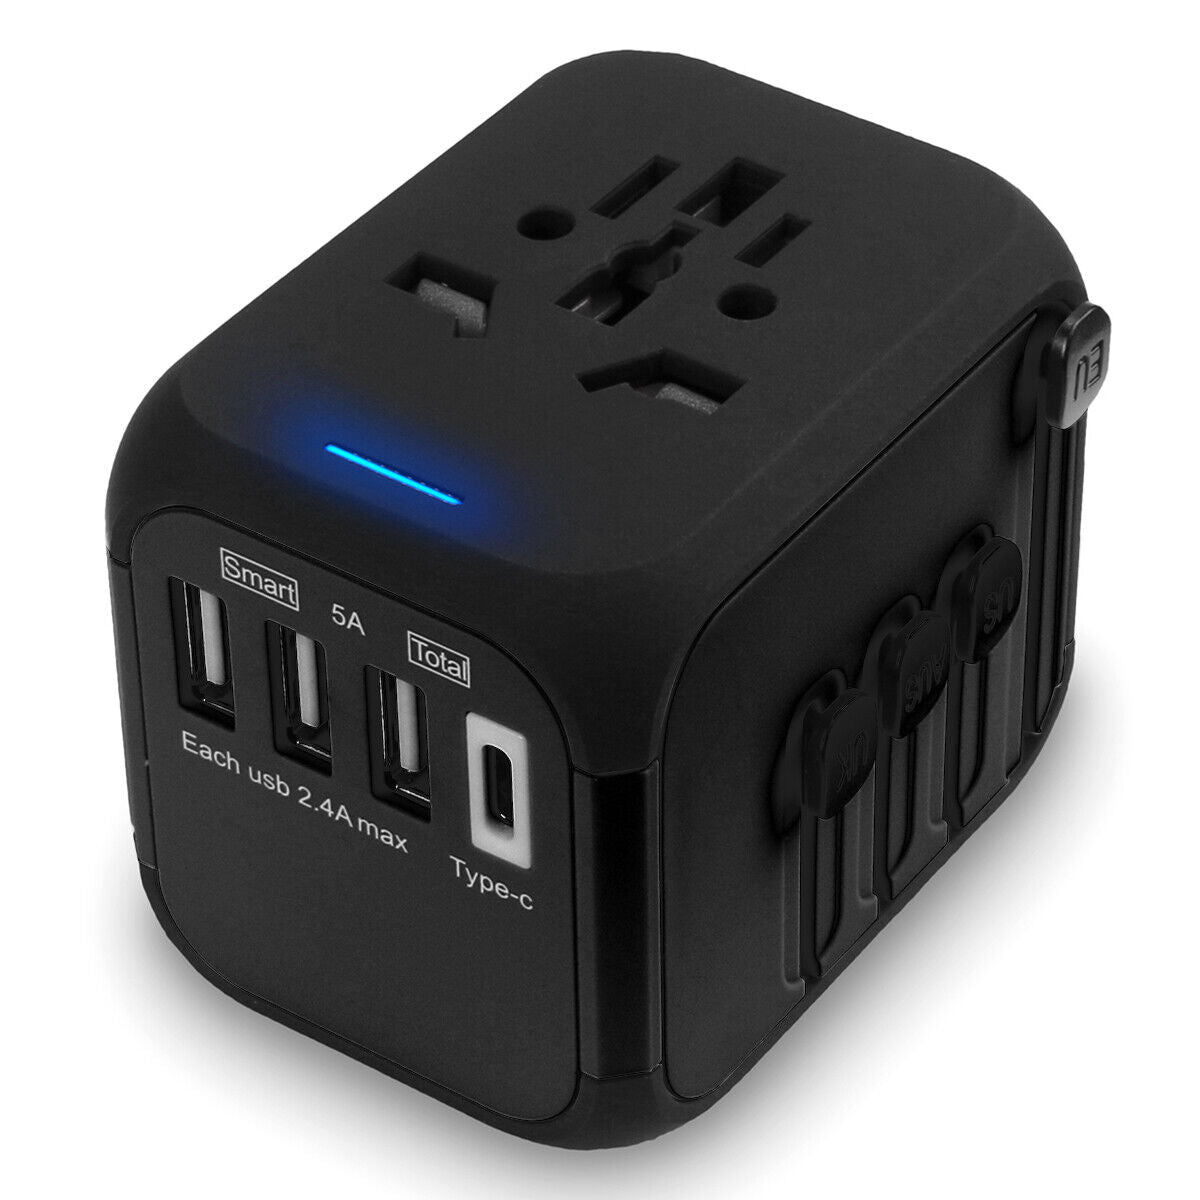  Aerotrunk Universal Travel Adapter Wall Charger - More Than 150  Countries - 4 USB Ports : Tools & Home Improvement